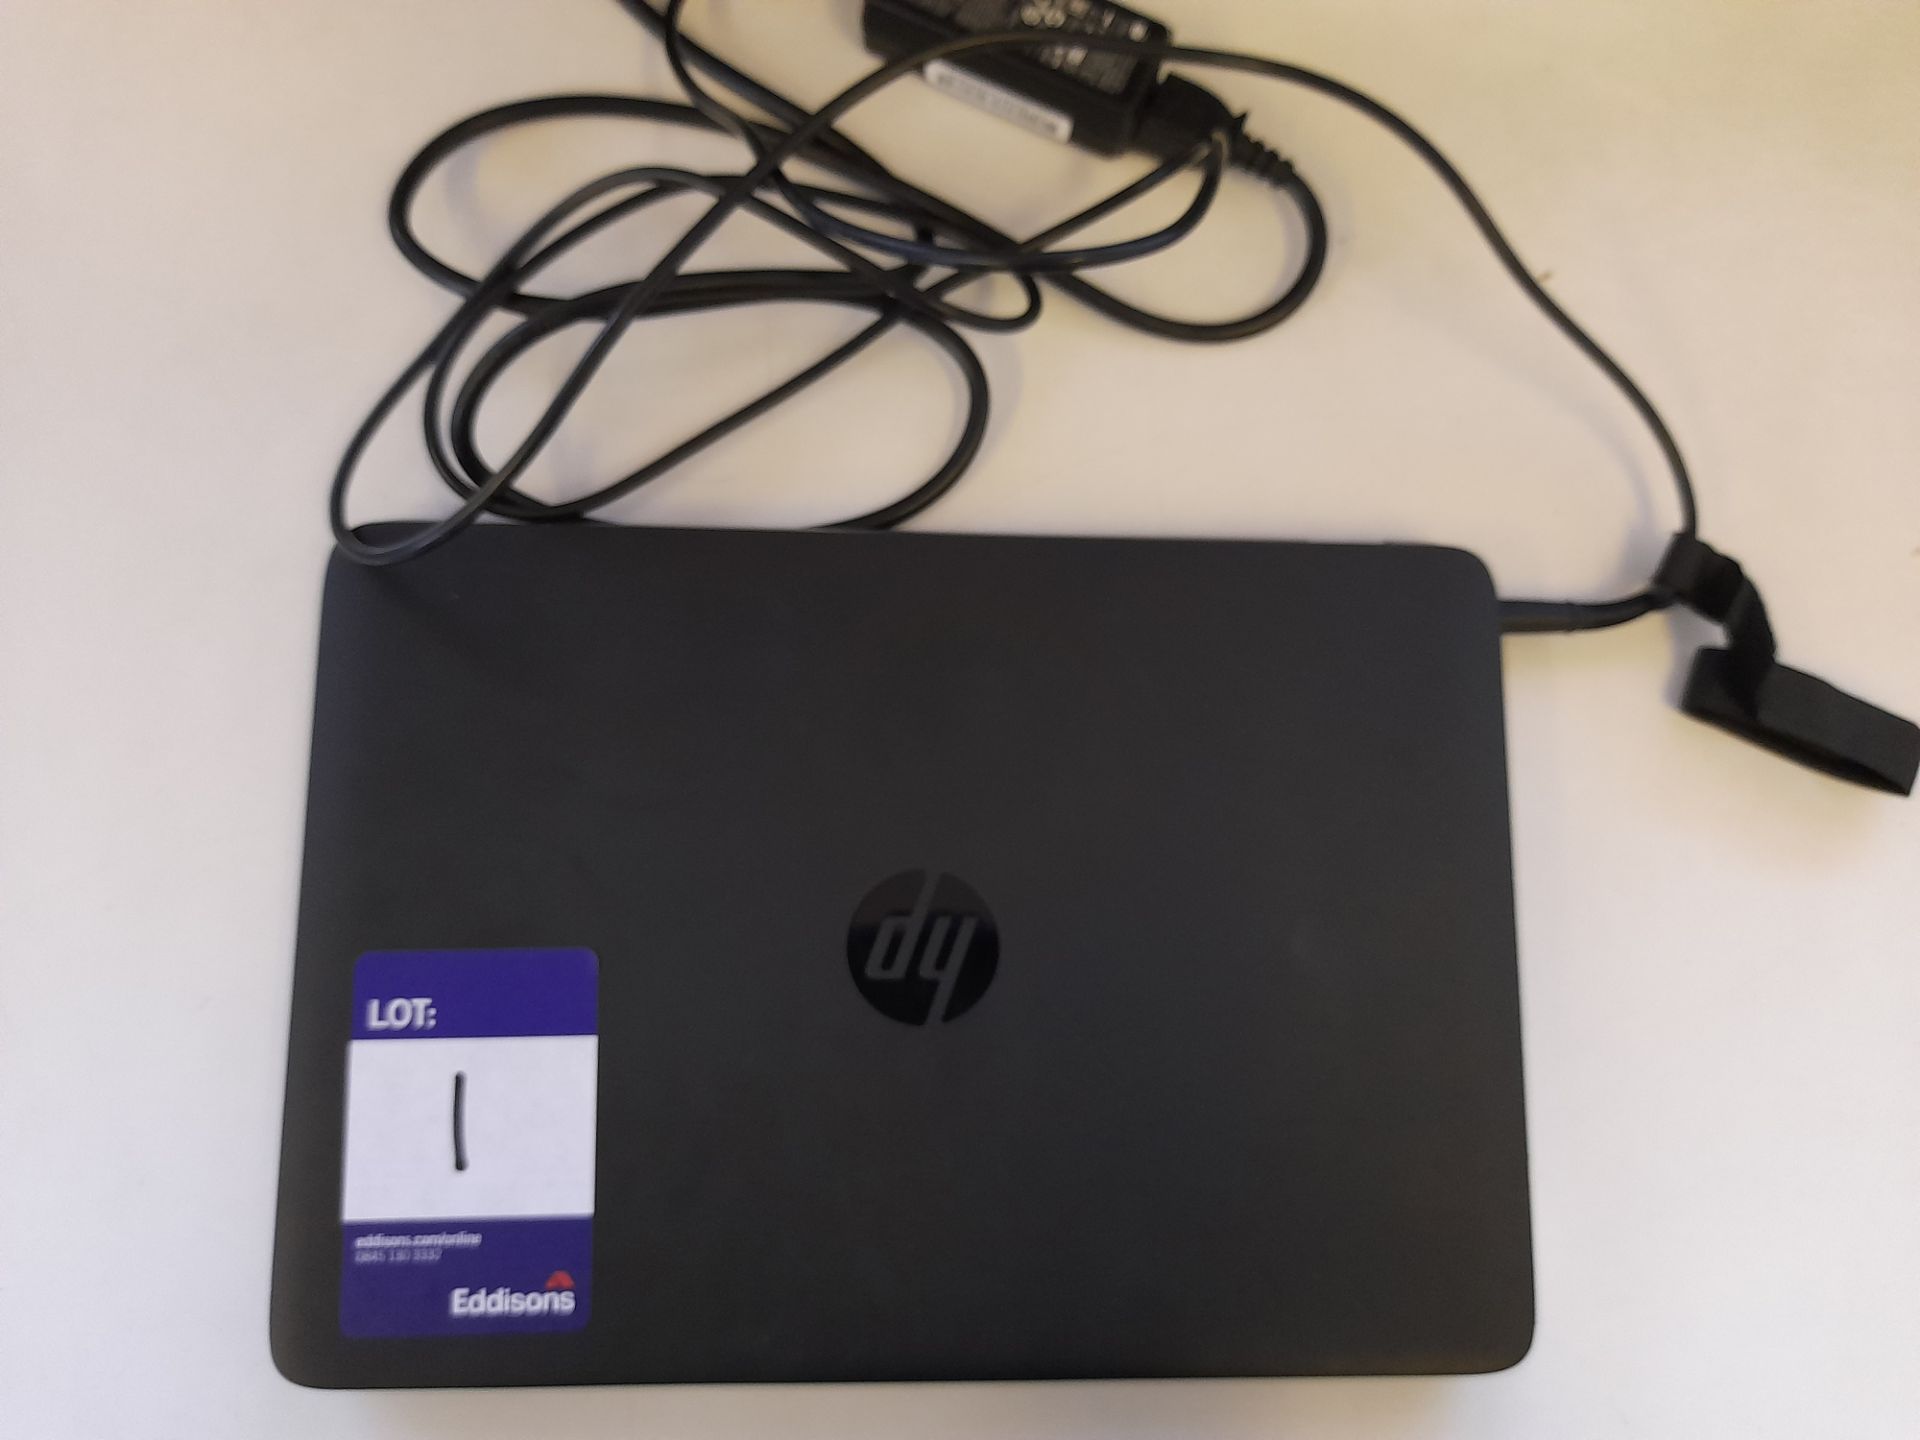 HP Elitebook 840 G2 Laptop, Product Number: G8S00A